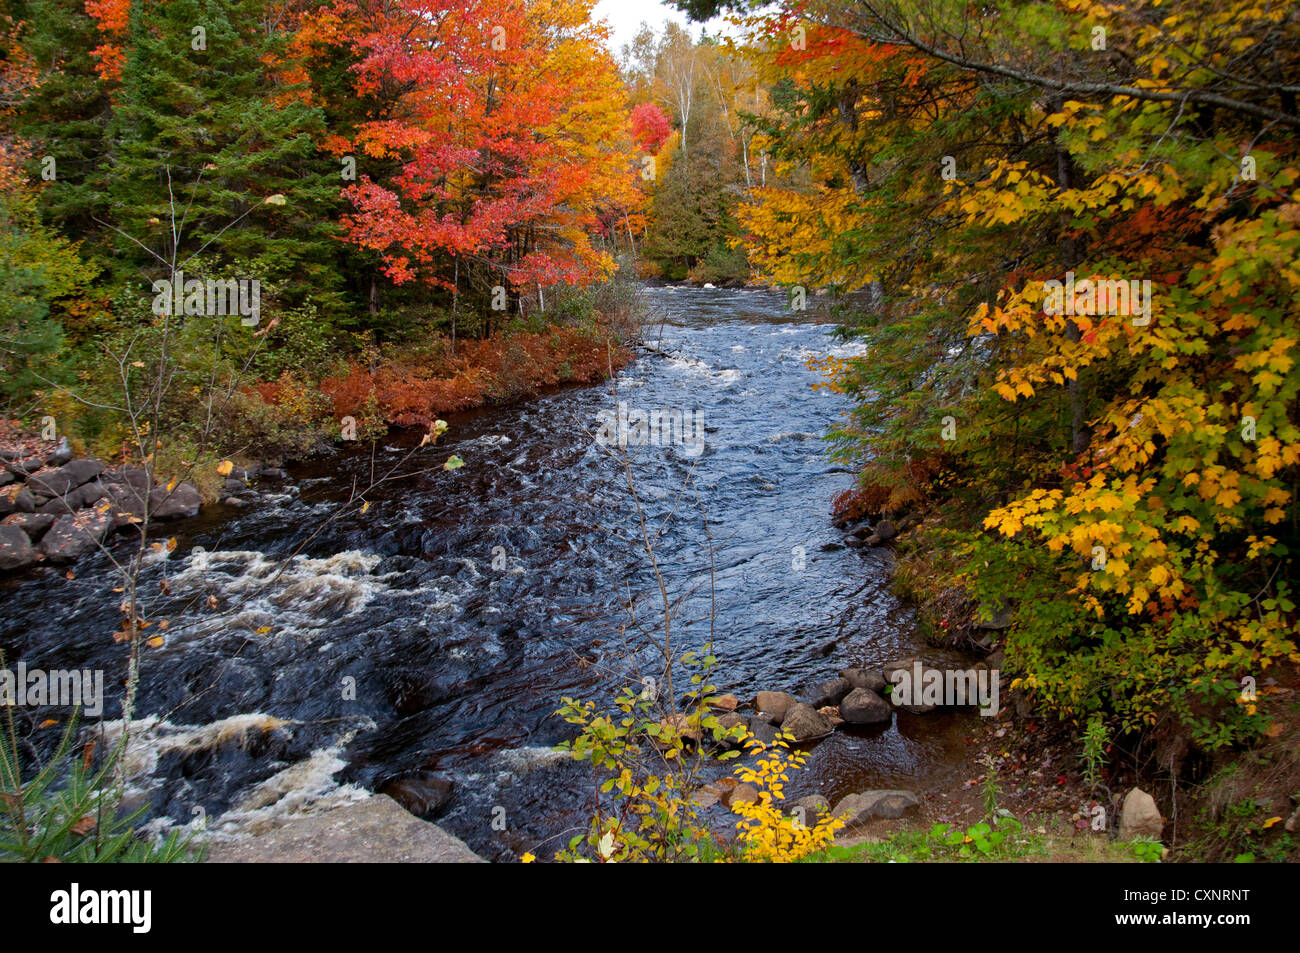 A view of Doncaster Falls and the North River in autumn.. Stock Photo